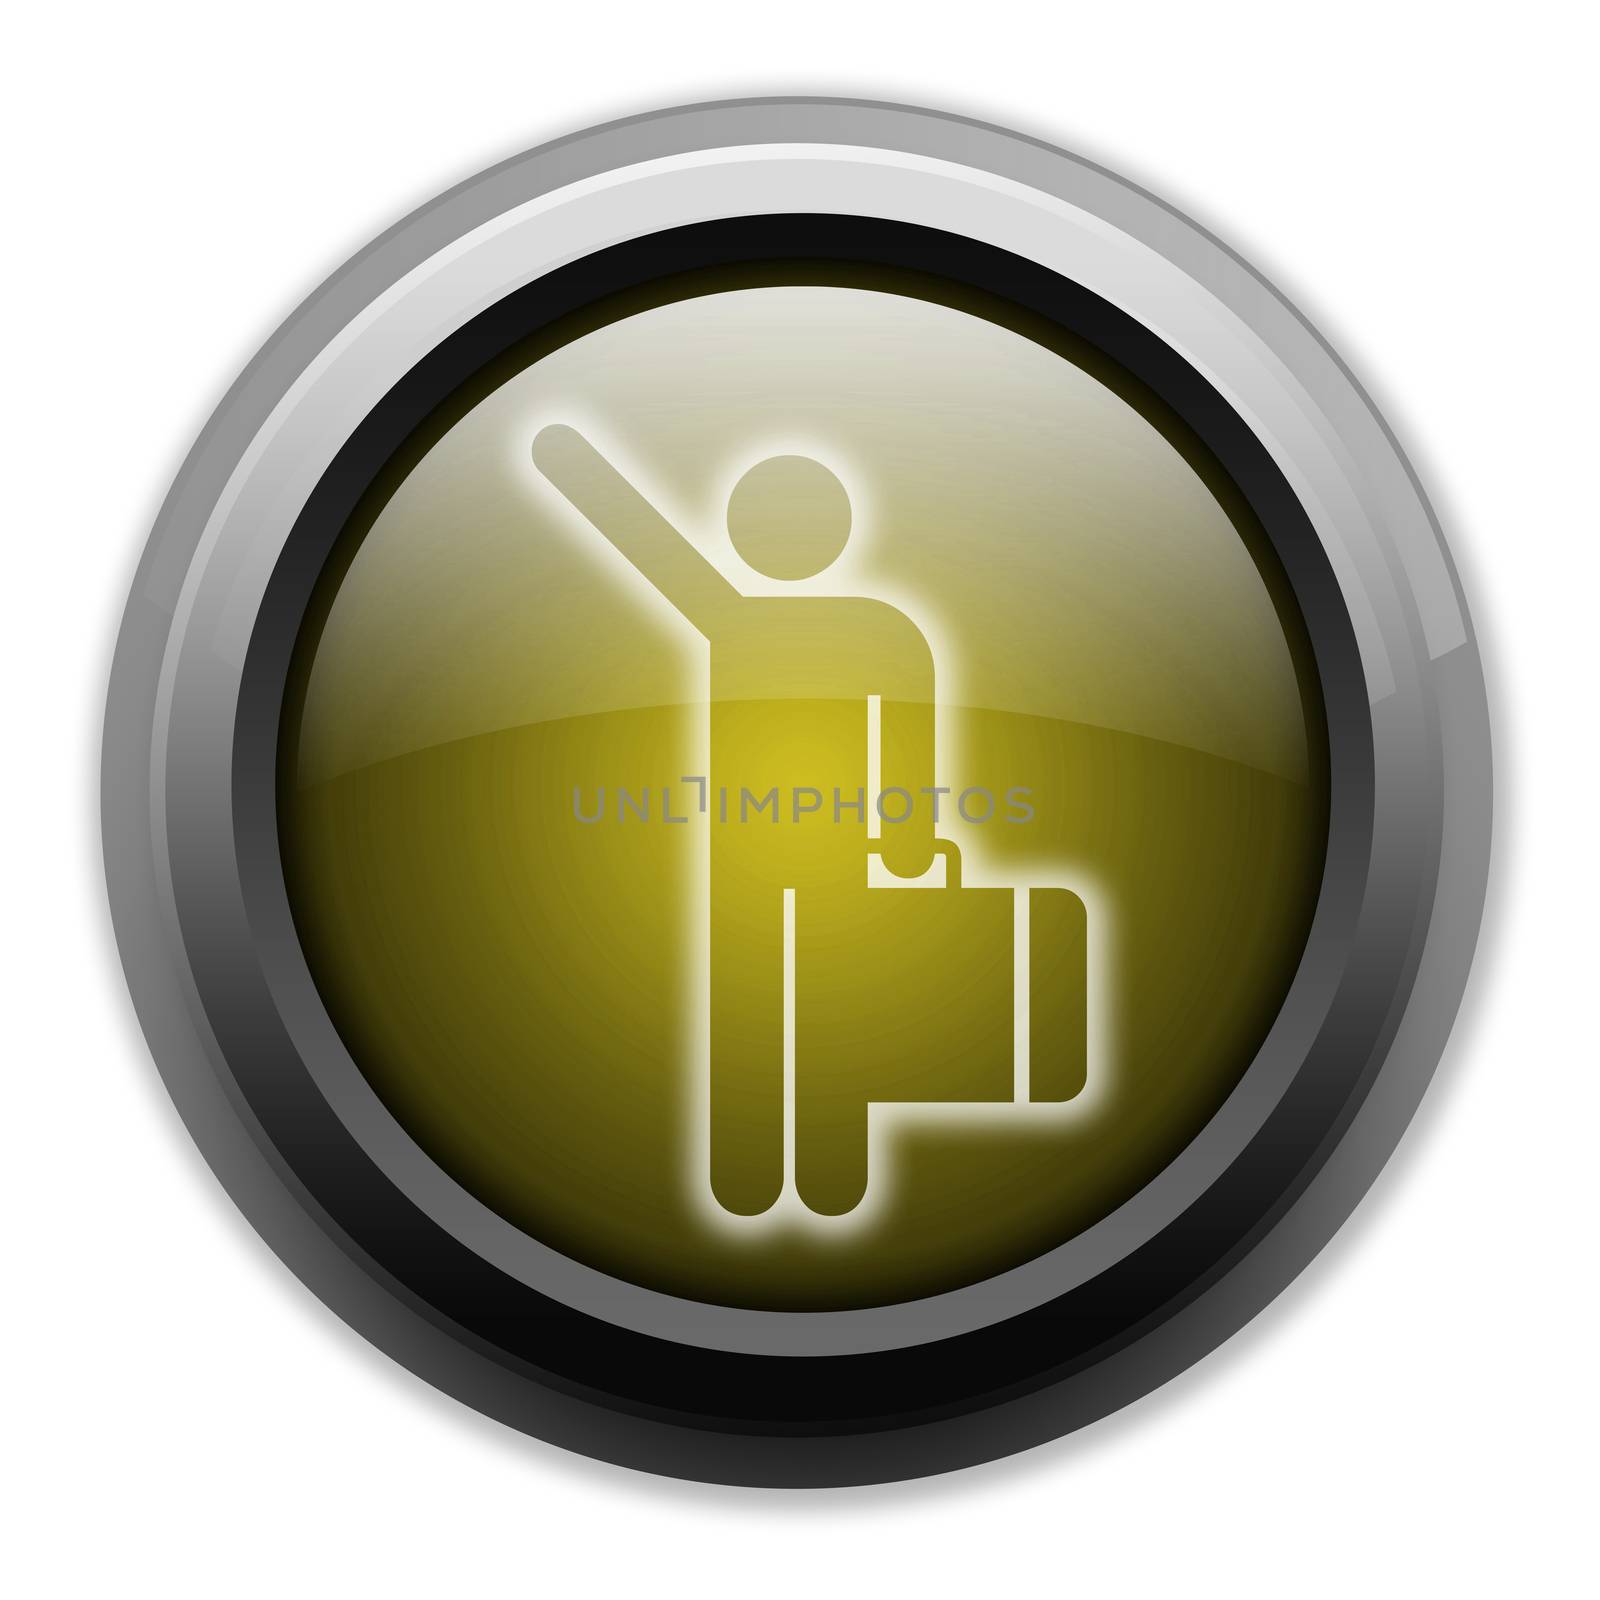 Icon, Button, Pictogram Arriving Flights by mindscanner